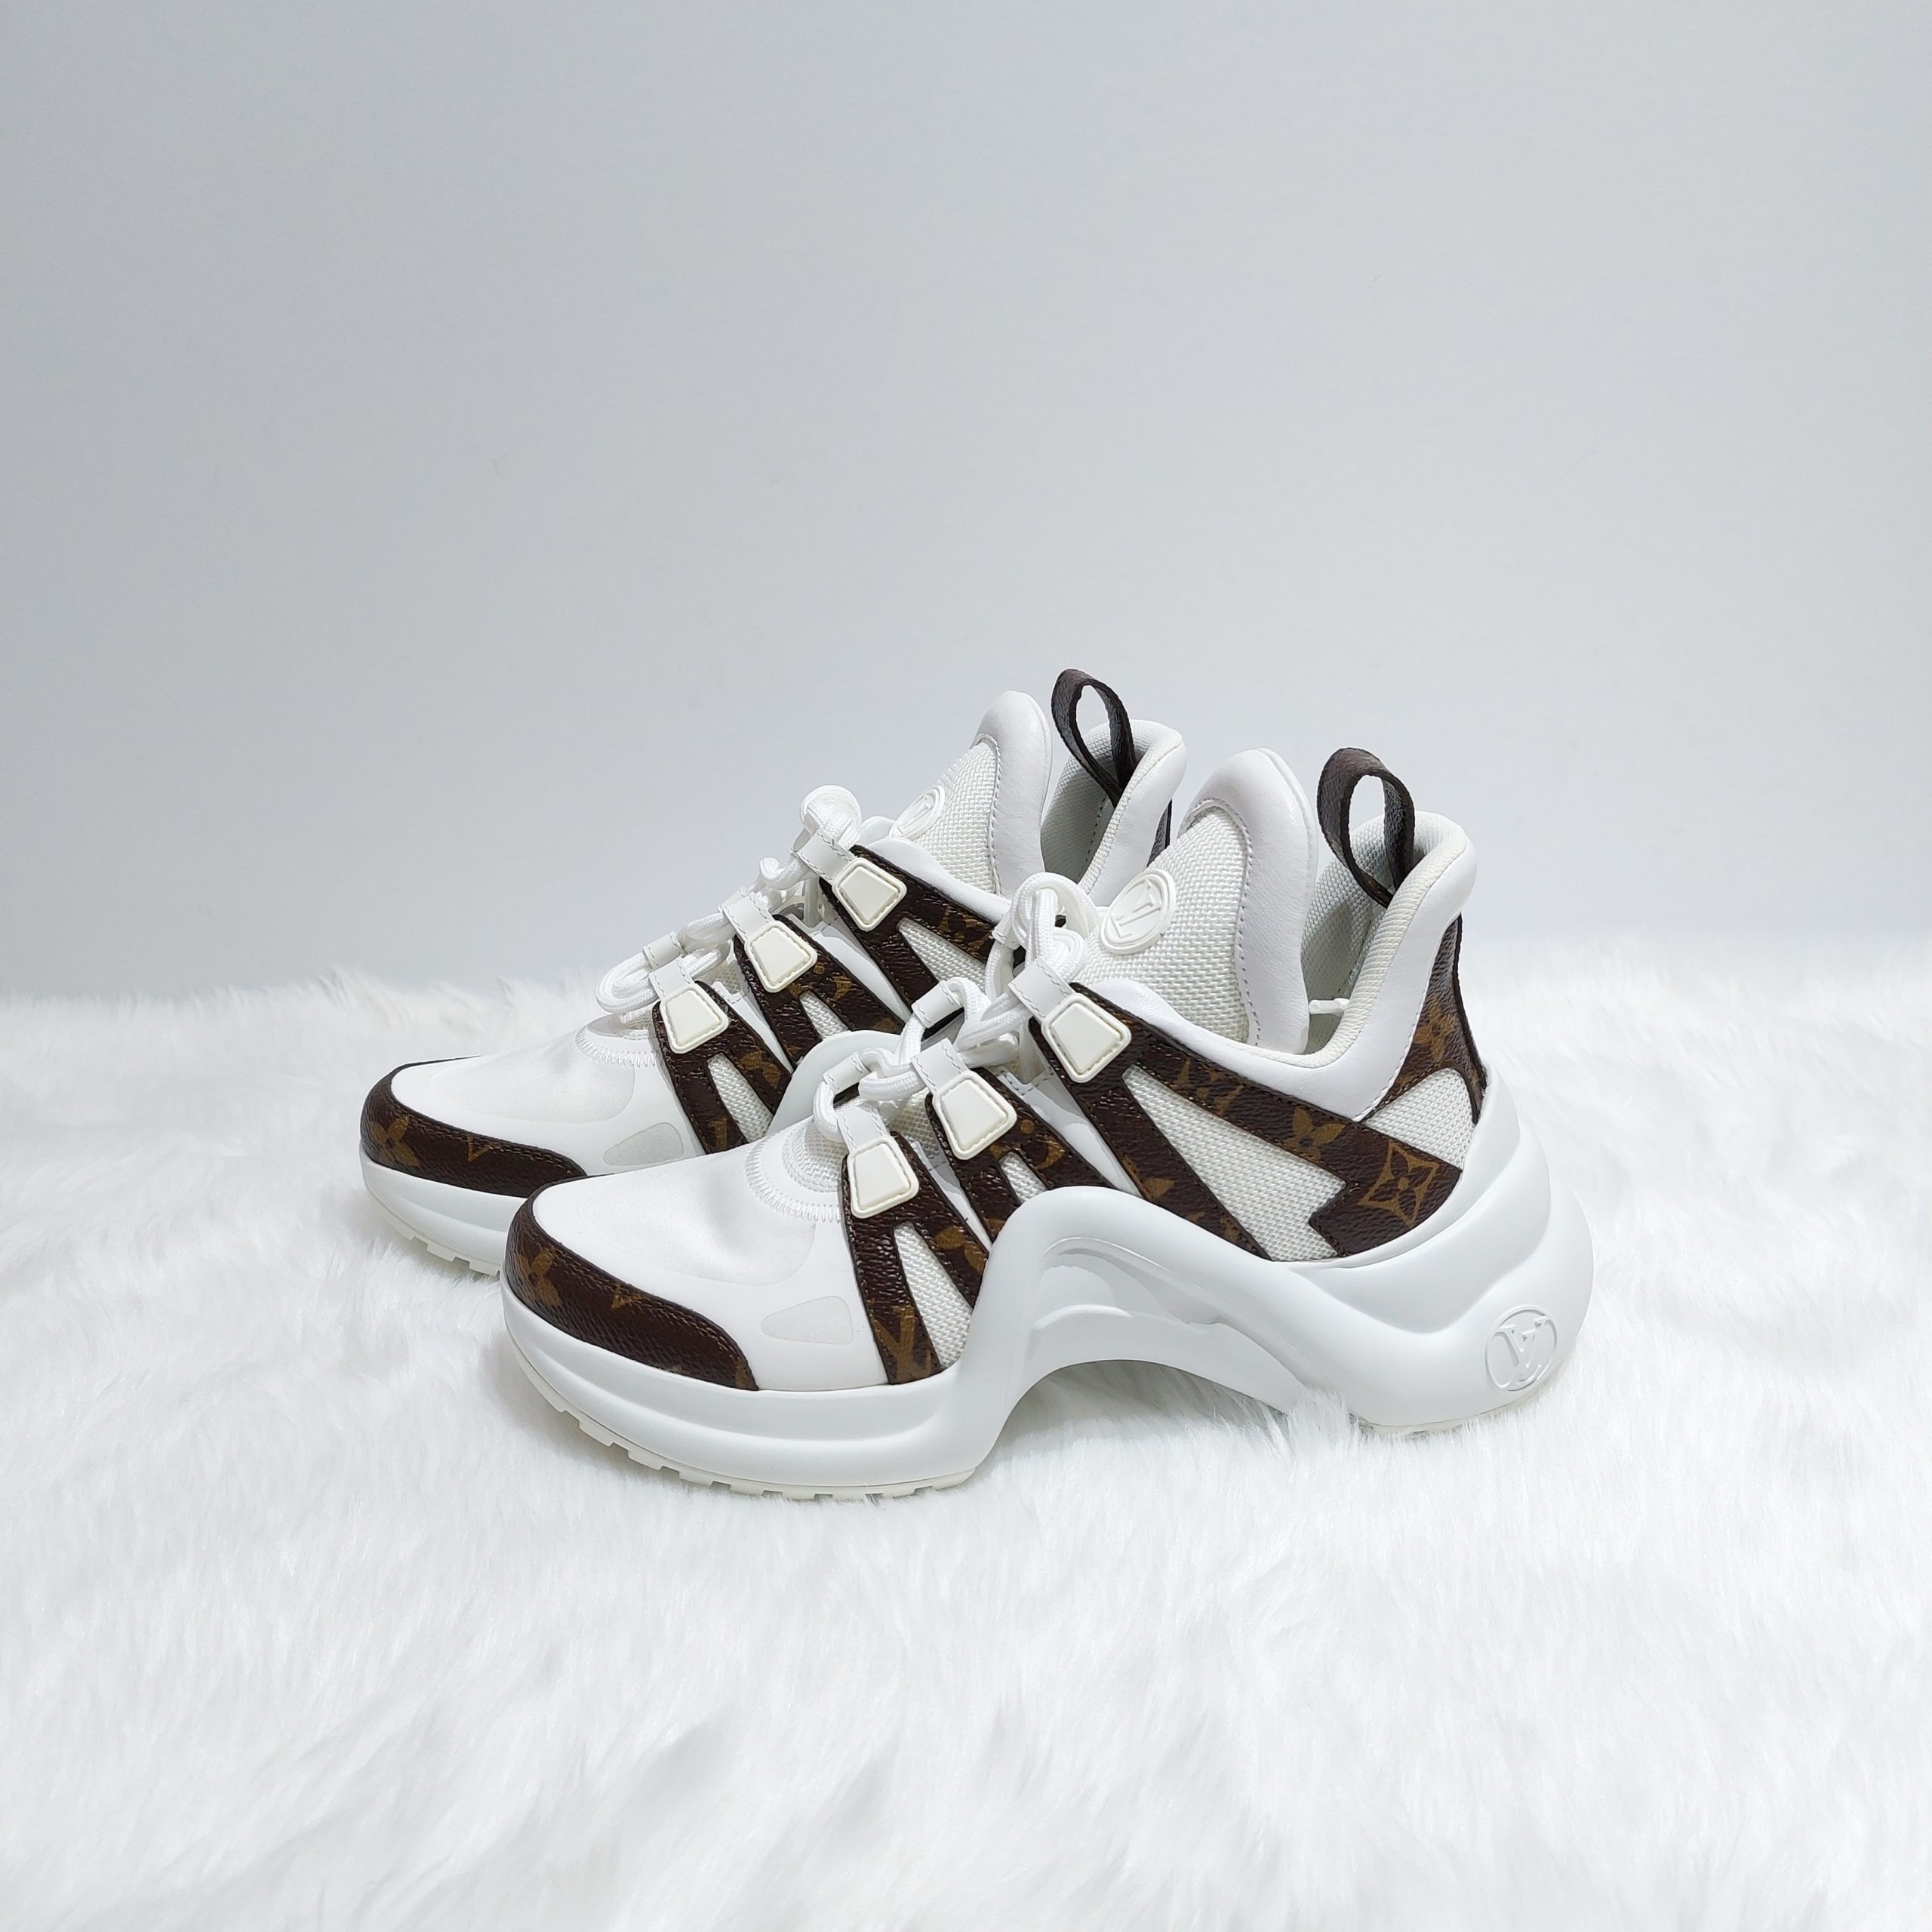 Louis Vuitton Archlight Sneakers - Current Season / Sold Out SIZE 36 at  1stDibs  louis vuitton shoes, louis vuitton archlight sneakers men's, louis  vuitton rubber shoes